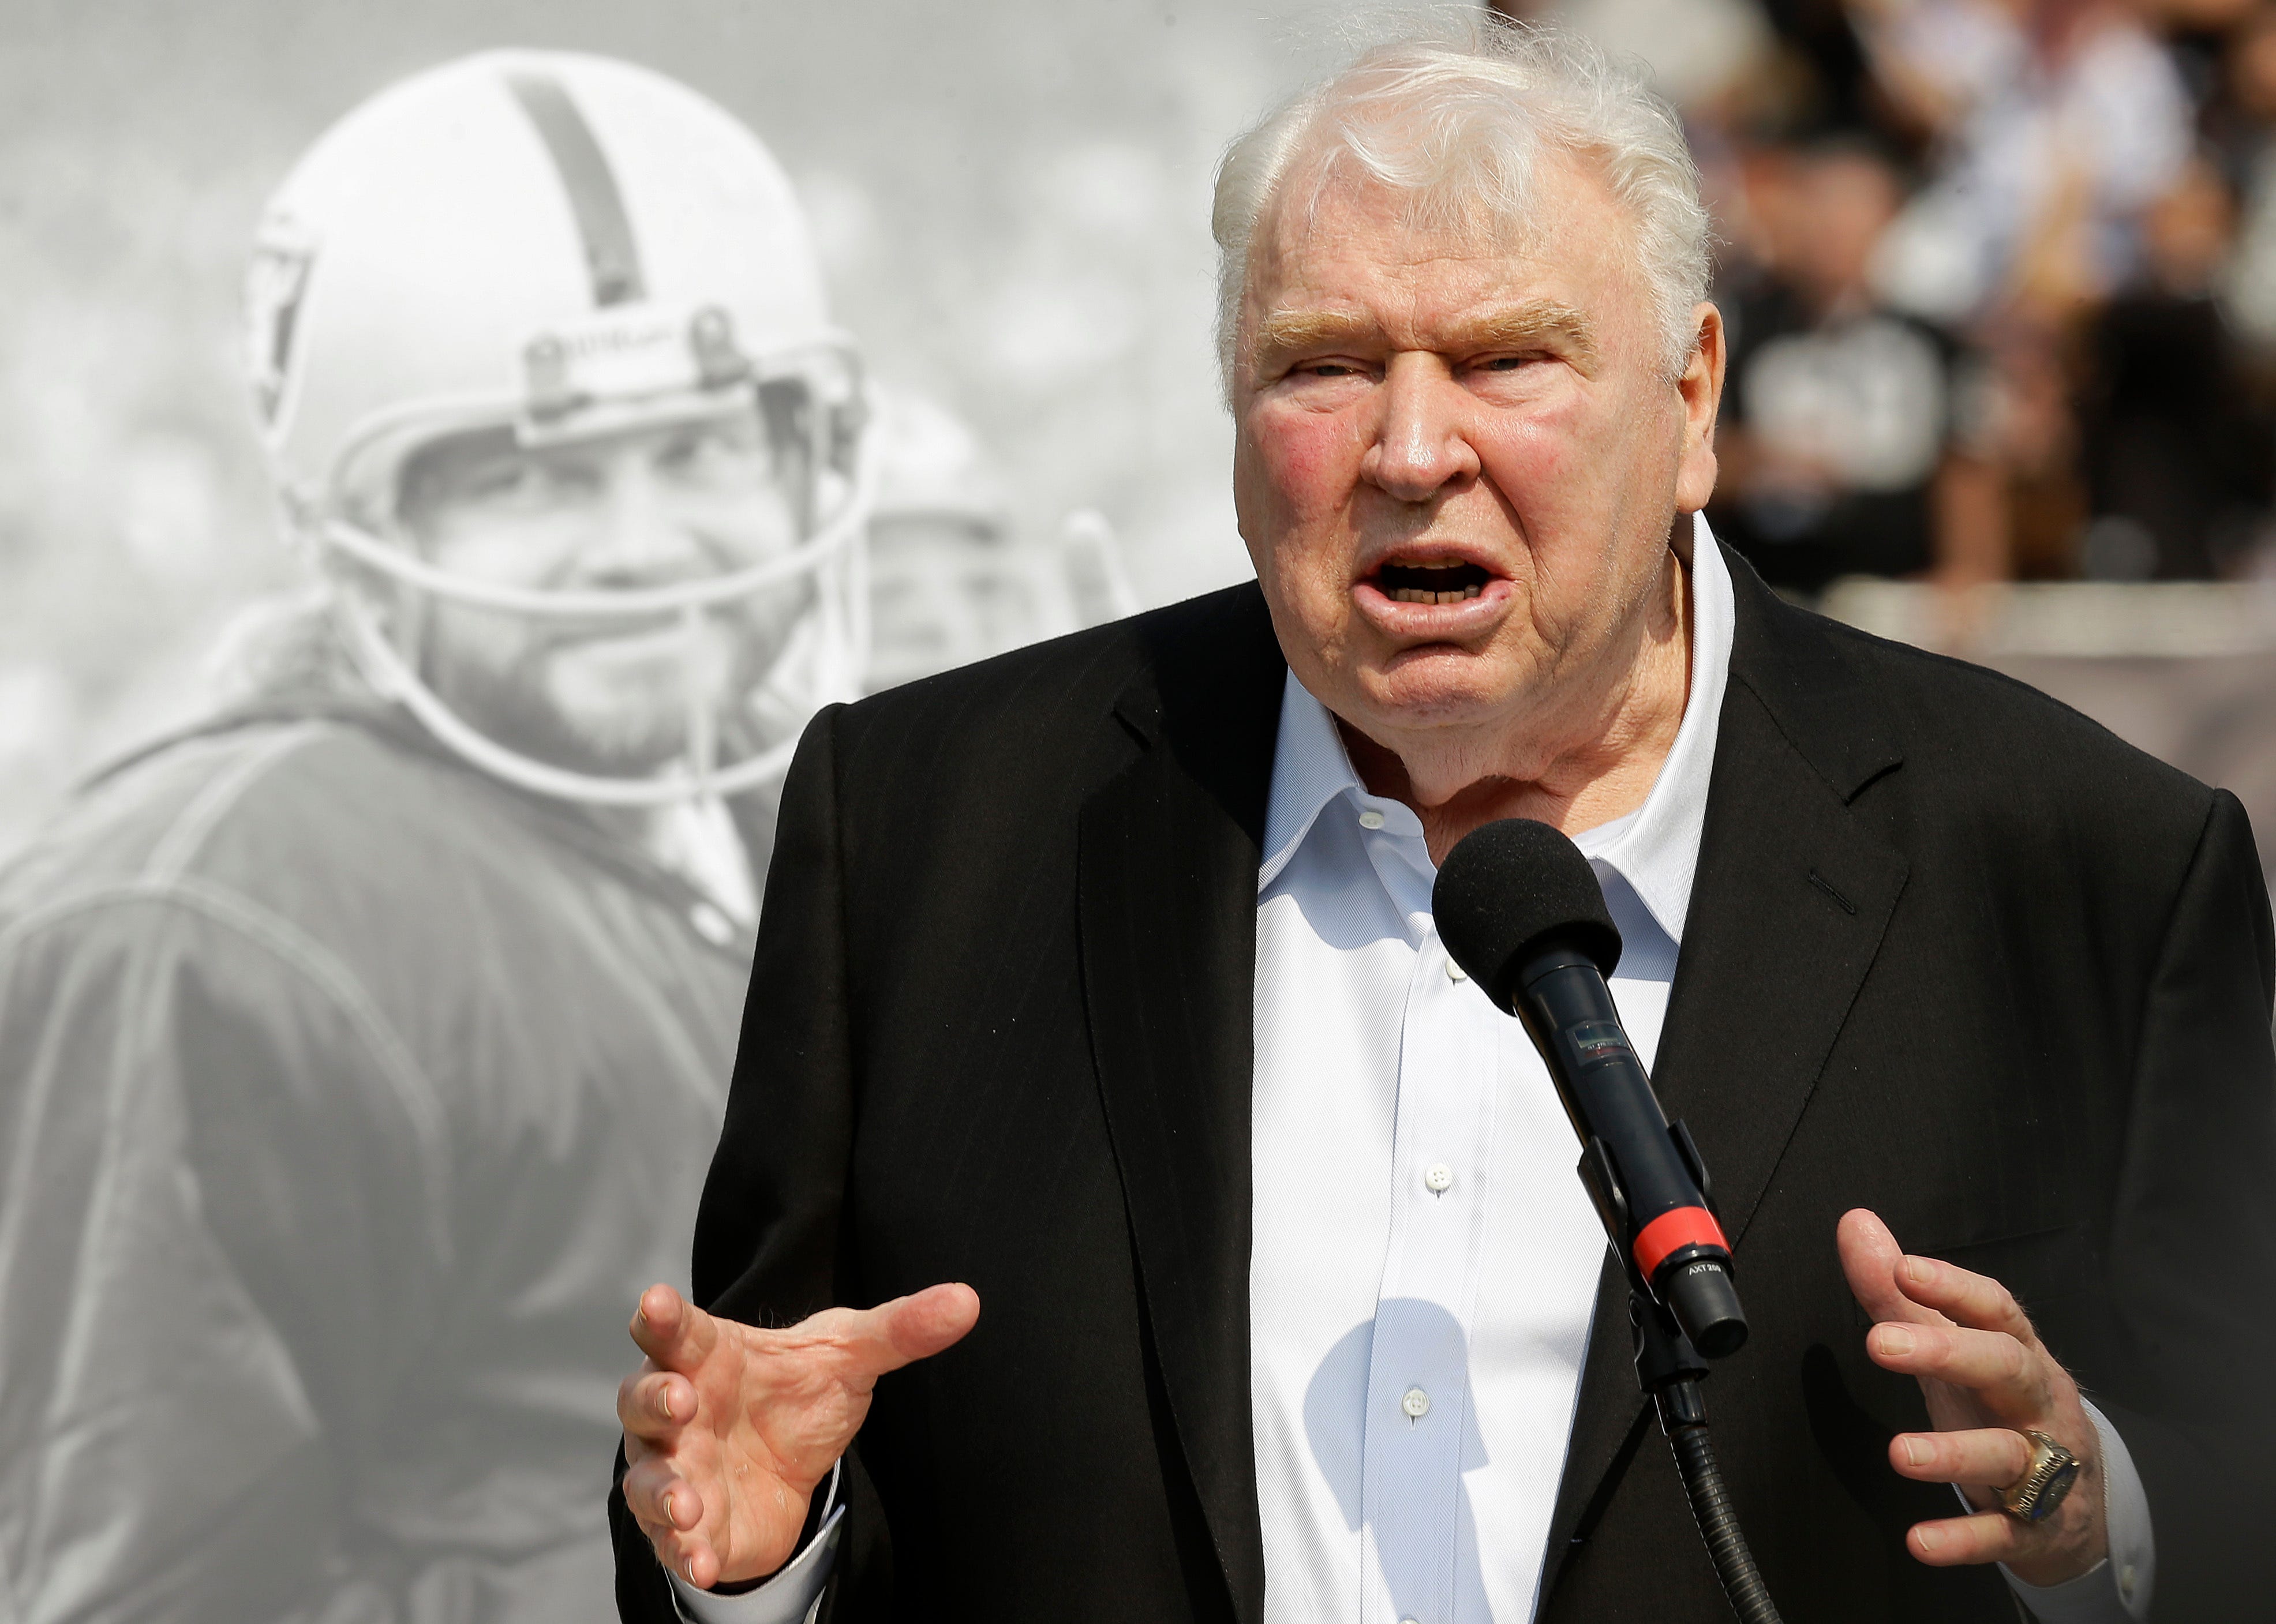 John Madden, Hall of Fame coach and legendary NFL analyst, dies at 85